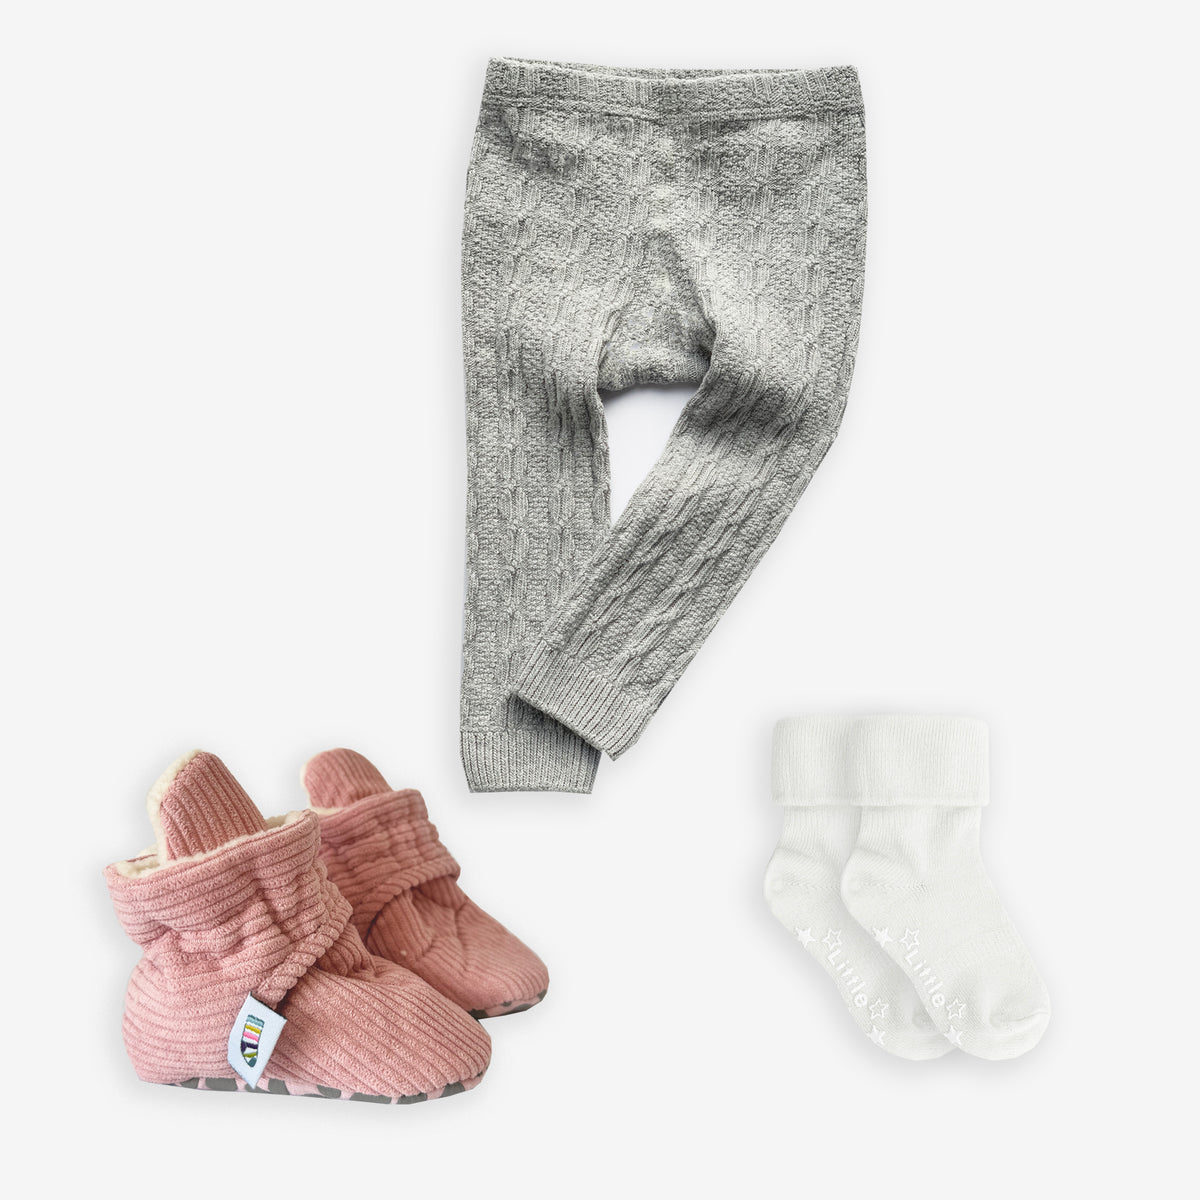 Non-Slip, Stay-on Bootie Bundle + Stay-on Socks + Cable Knit Leggings - Rose Corduroy